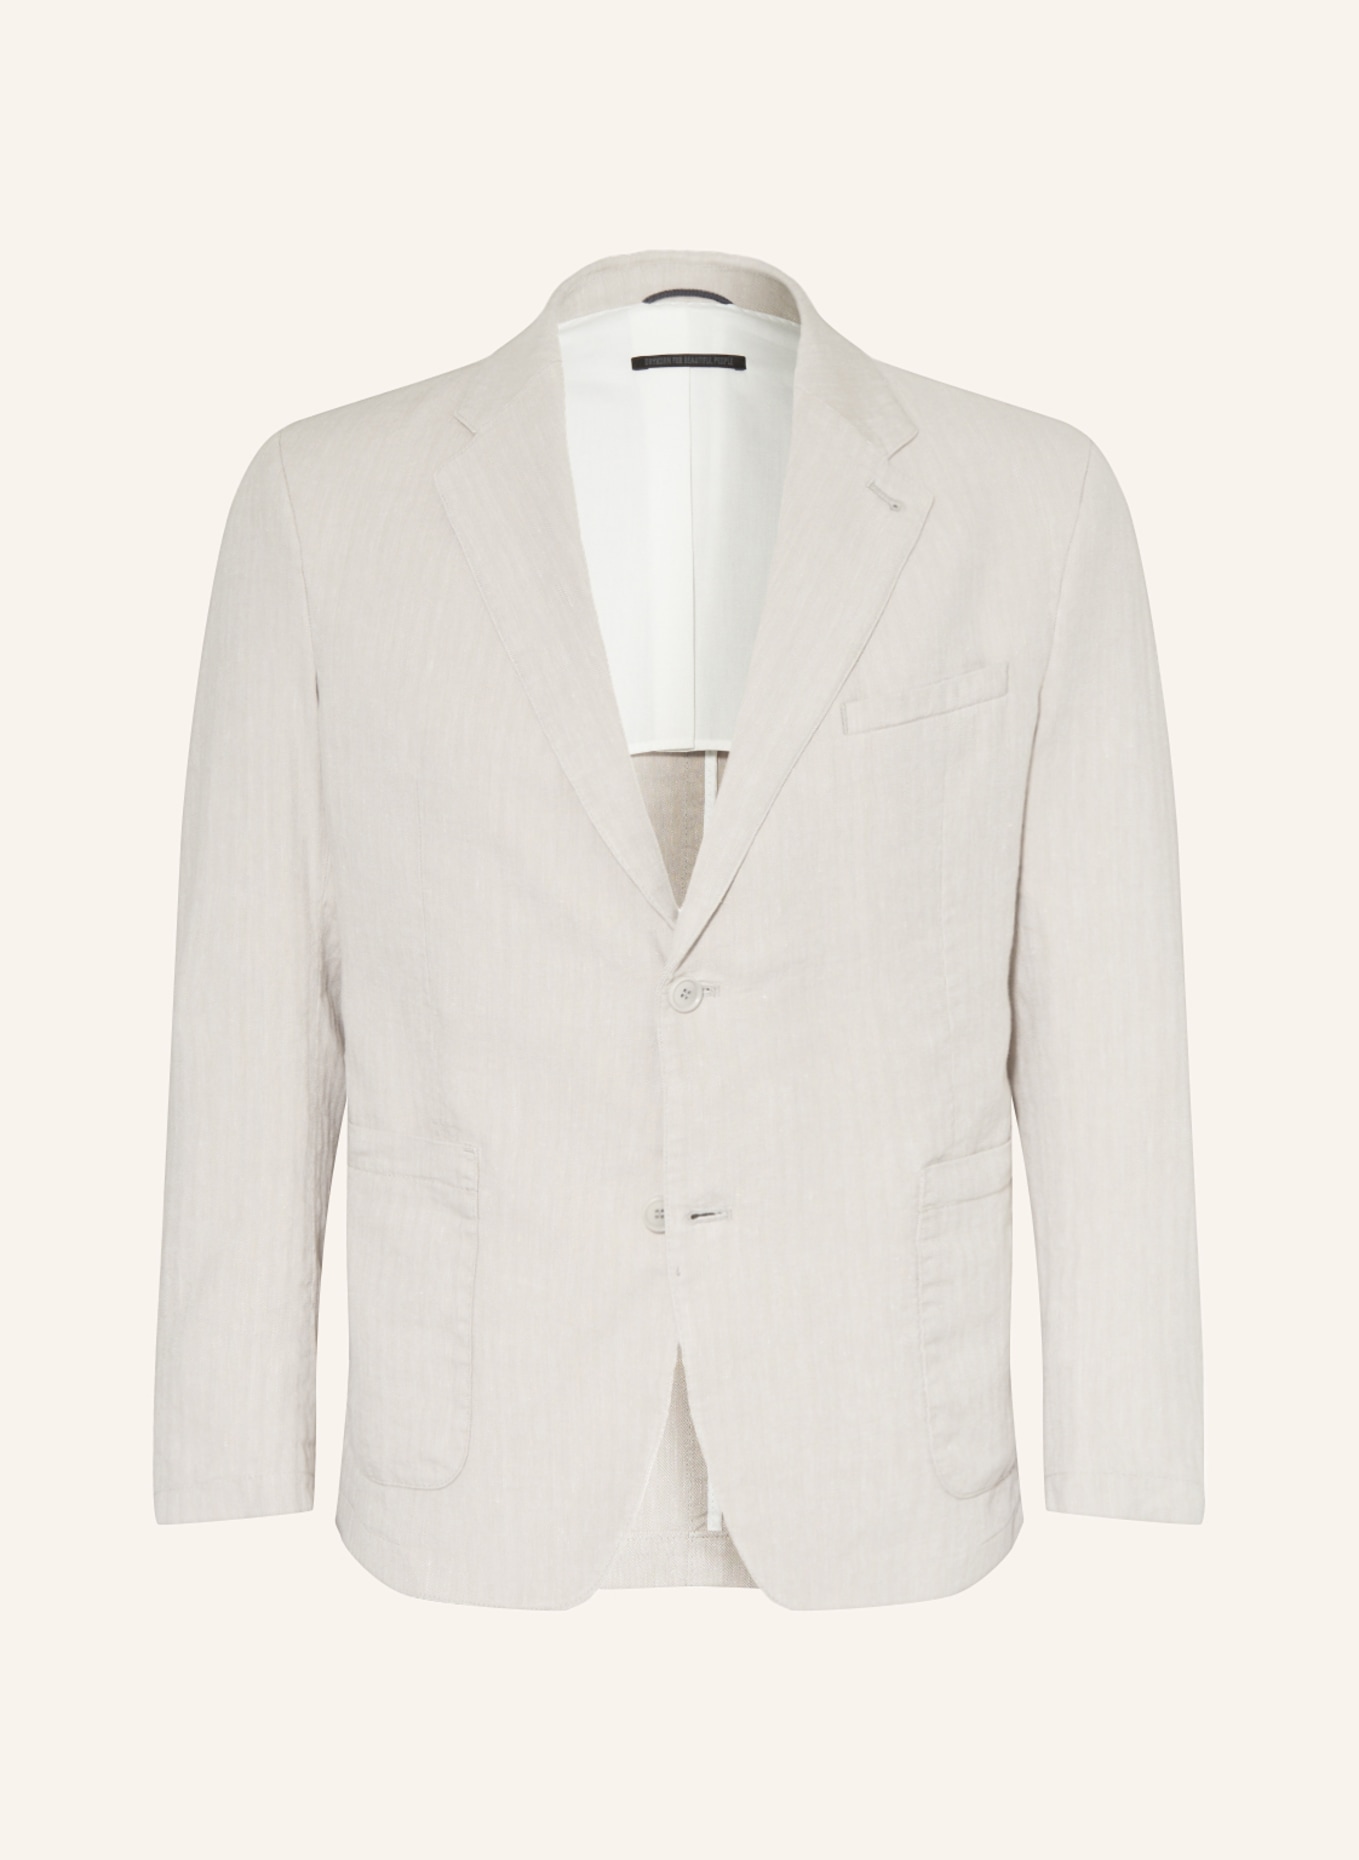 DRYKORN Suit jacket CARLES regular fit with linen, Color: LIGHT GRAY (Image 1)